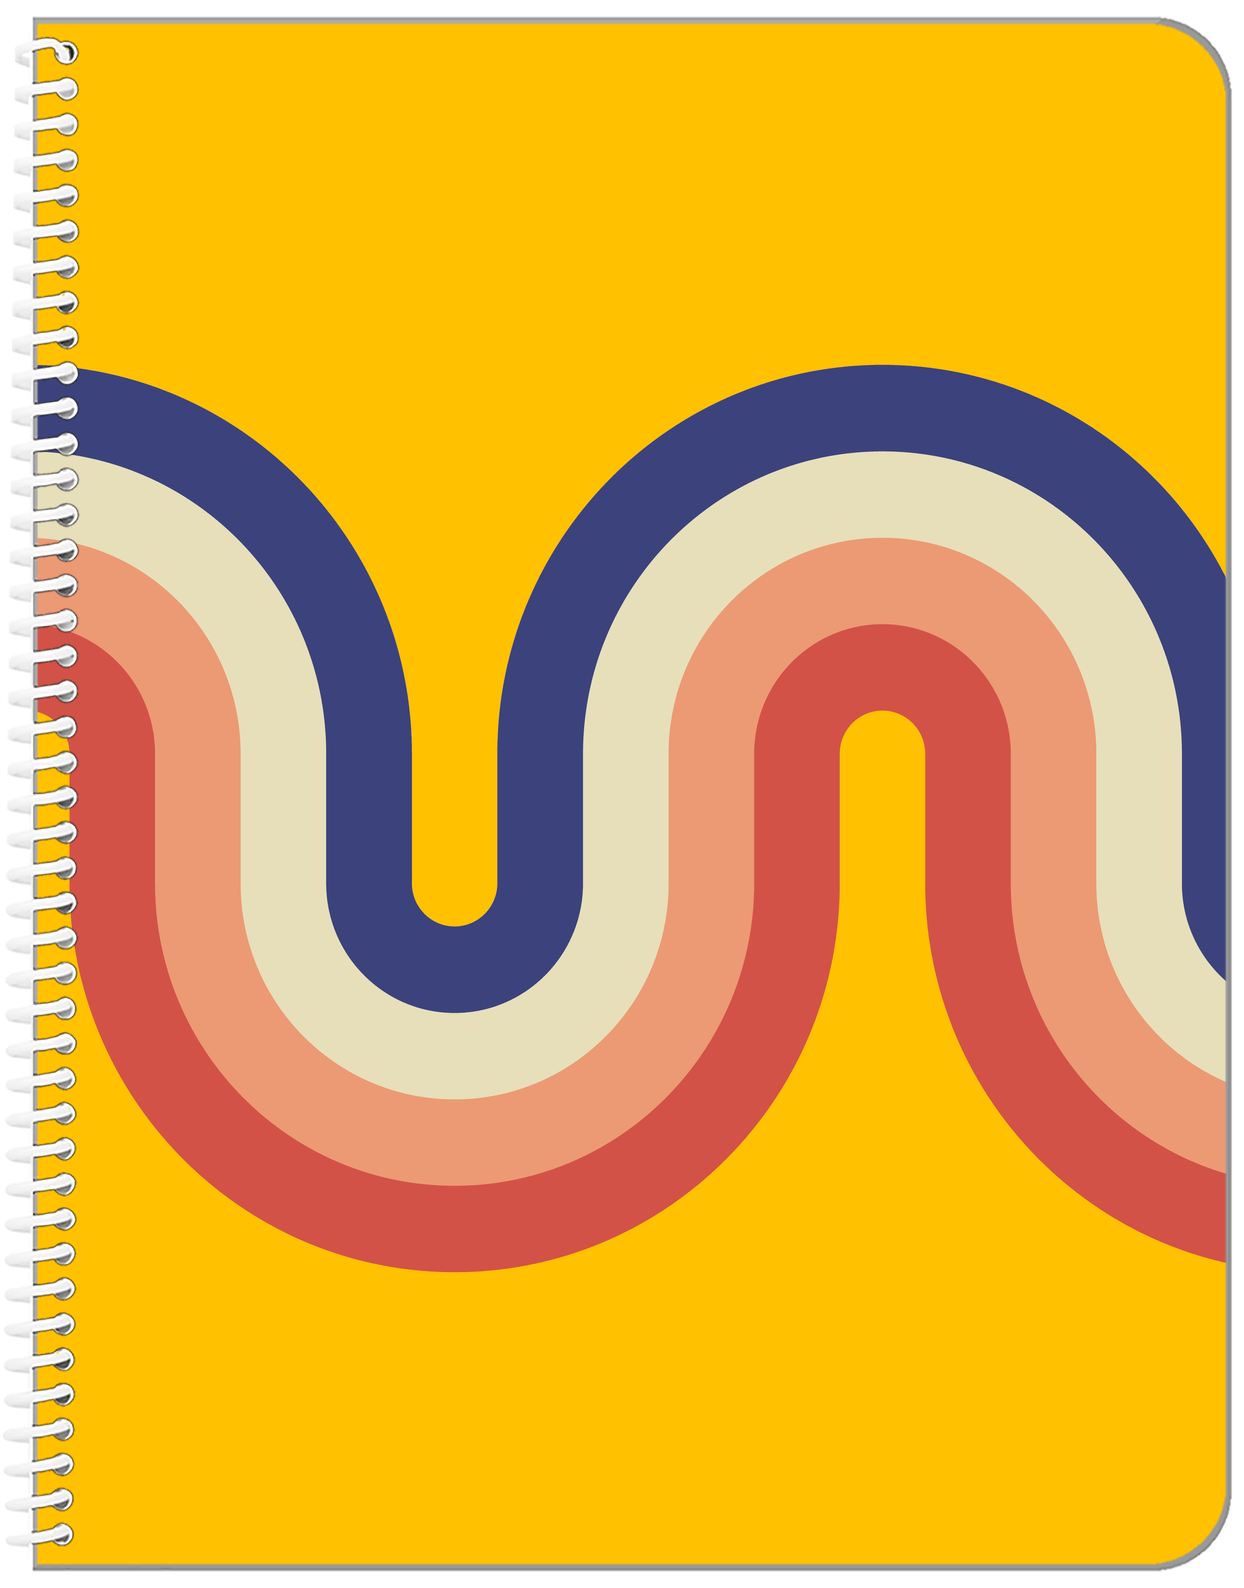 Retro Waves Notebook - Front View